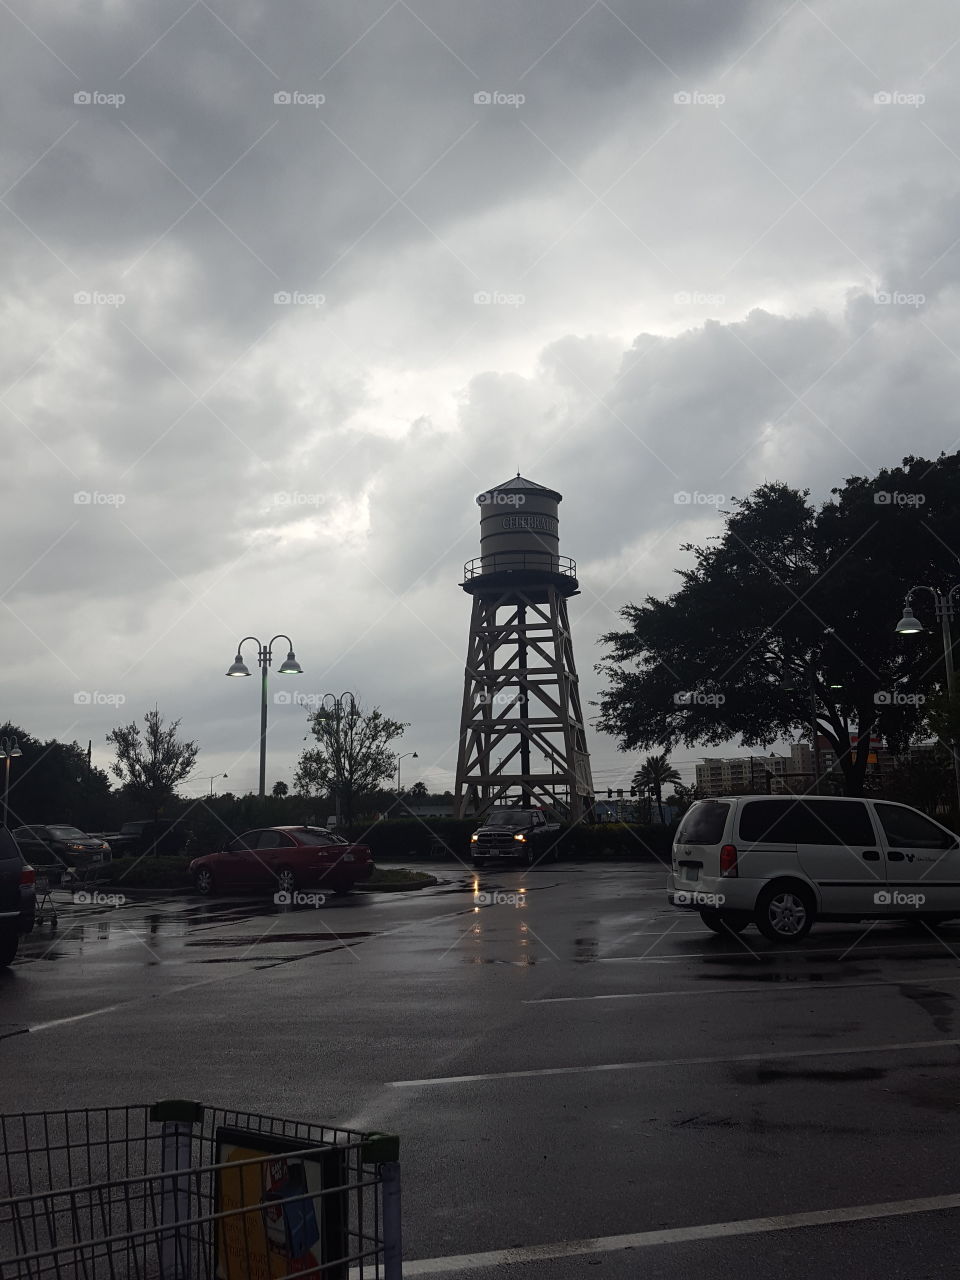 Water Tower on a Gloomy Day